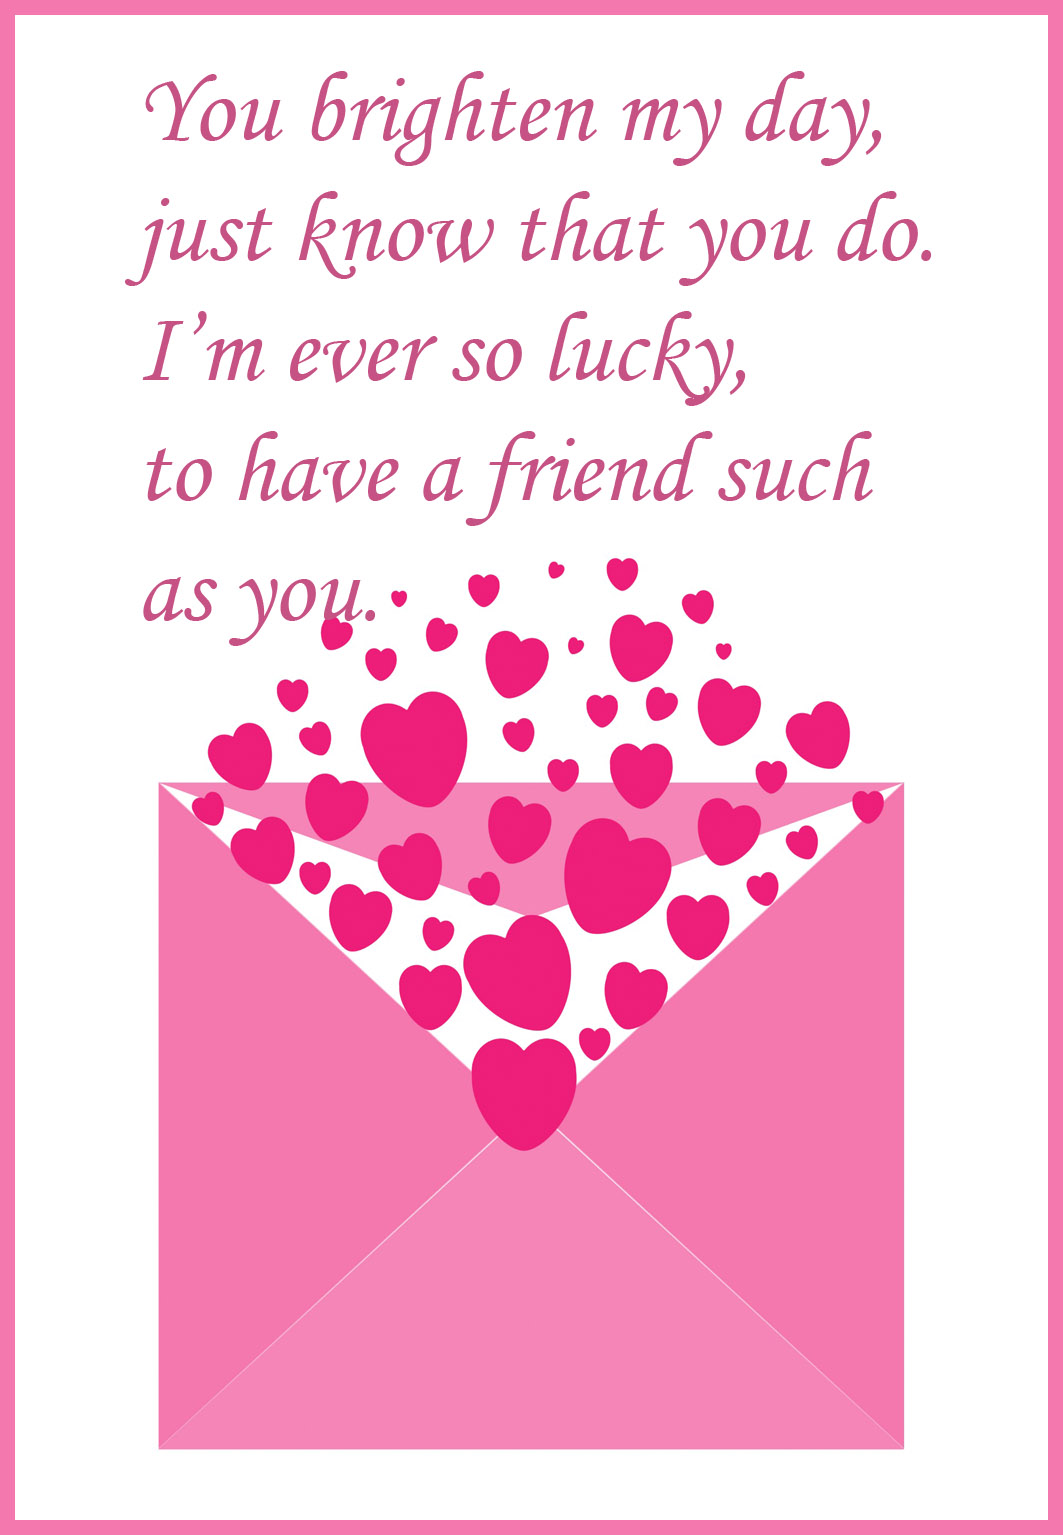 friendship-valentines-day-cards | Amy Rees Anderson's Blog